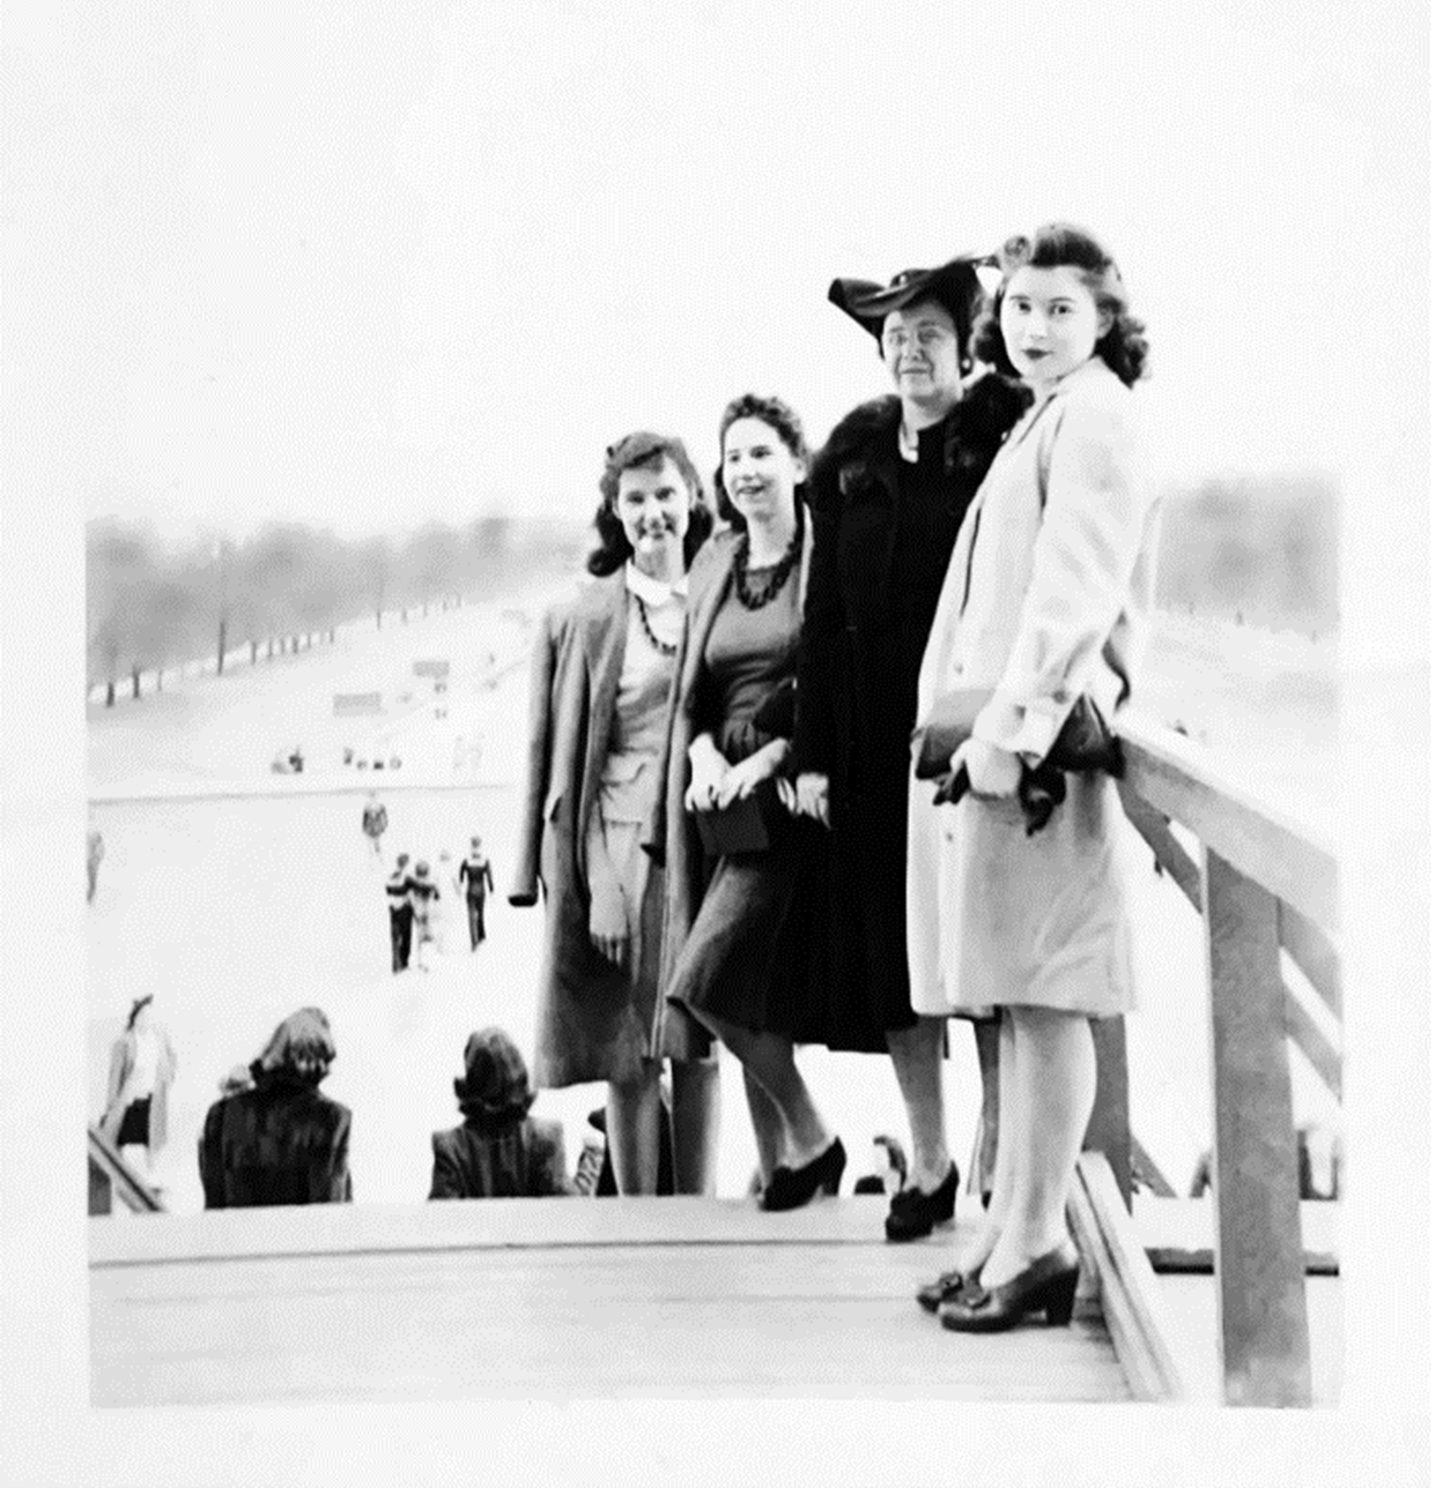 Ada Nestor (front right) and others from Arlington Hall at the National Mall, c. 1943